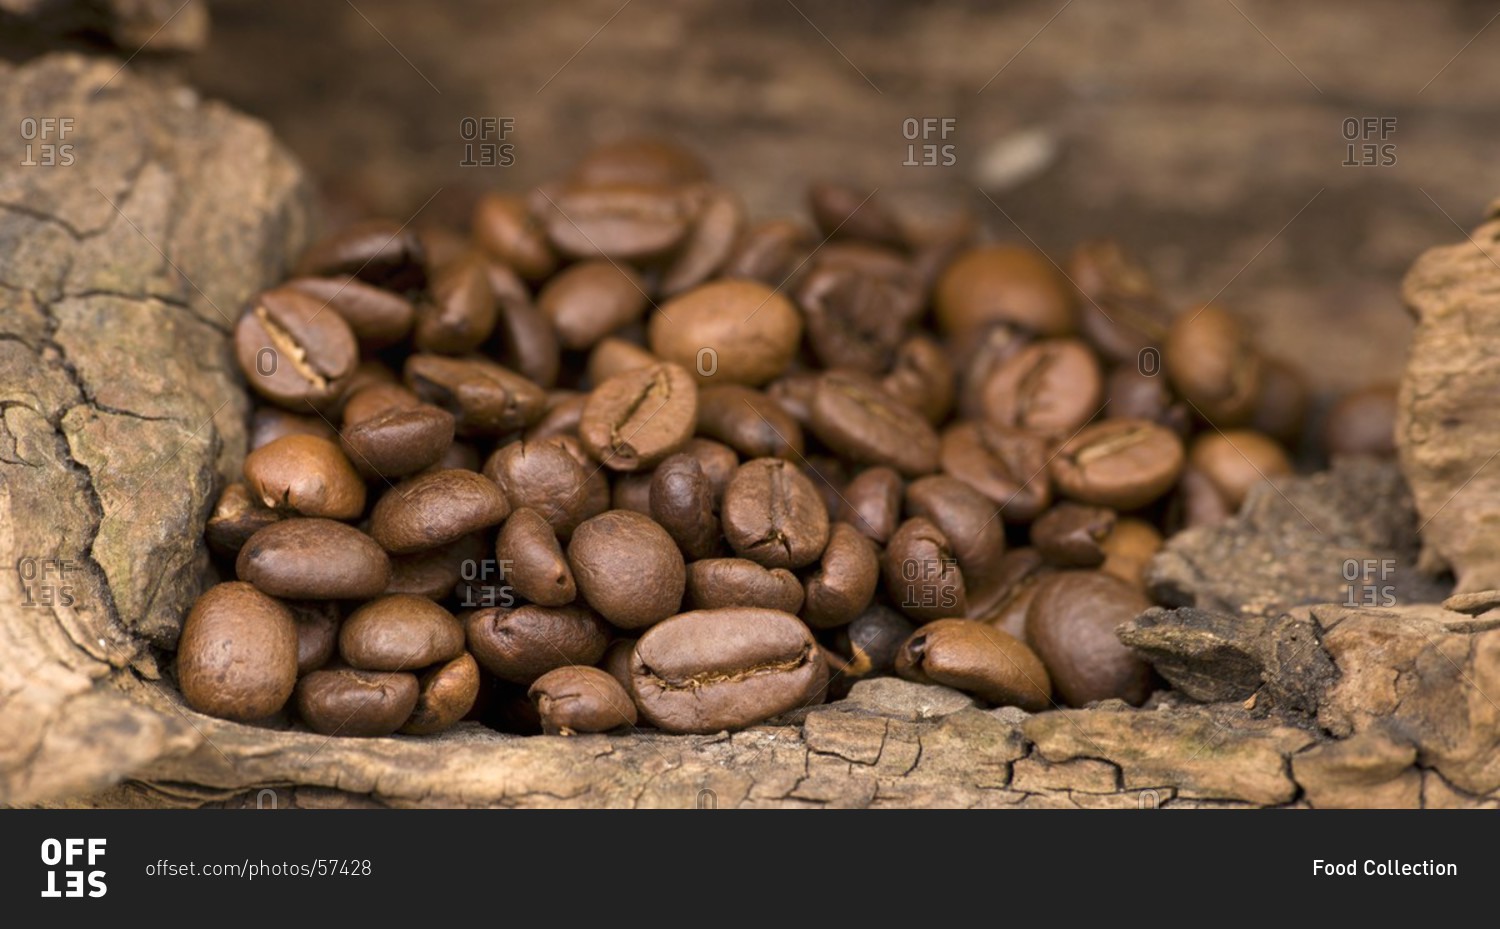 Coffee beans on a wooden surface